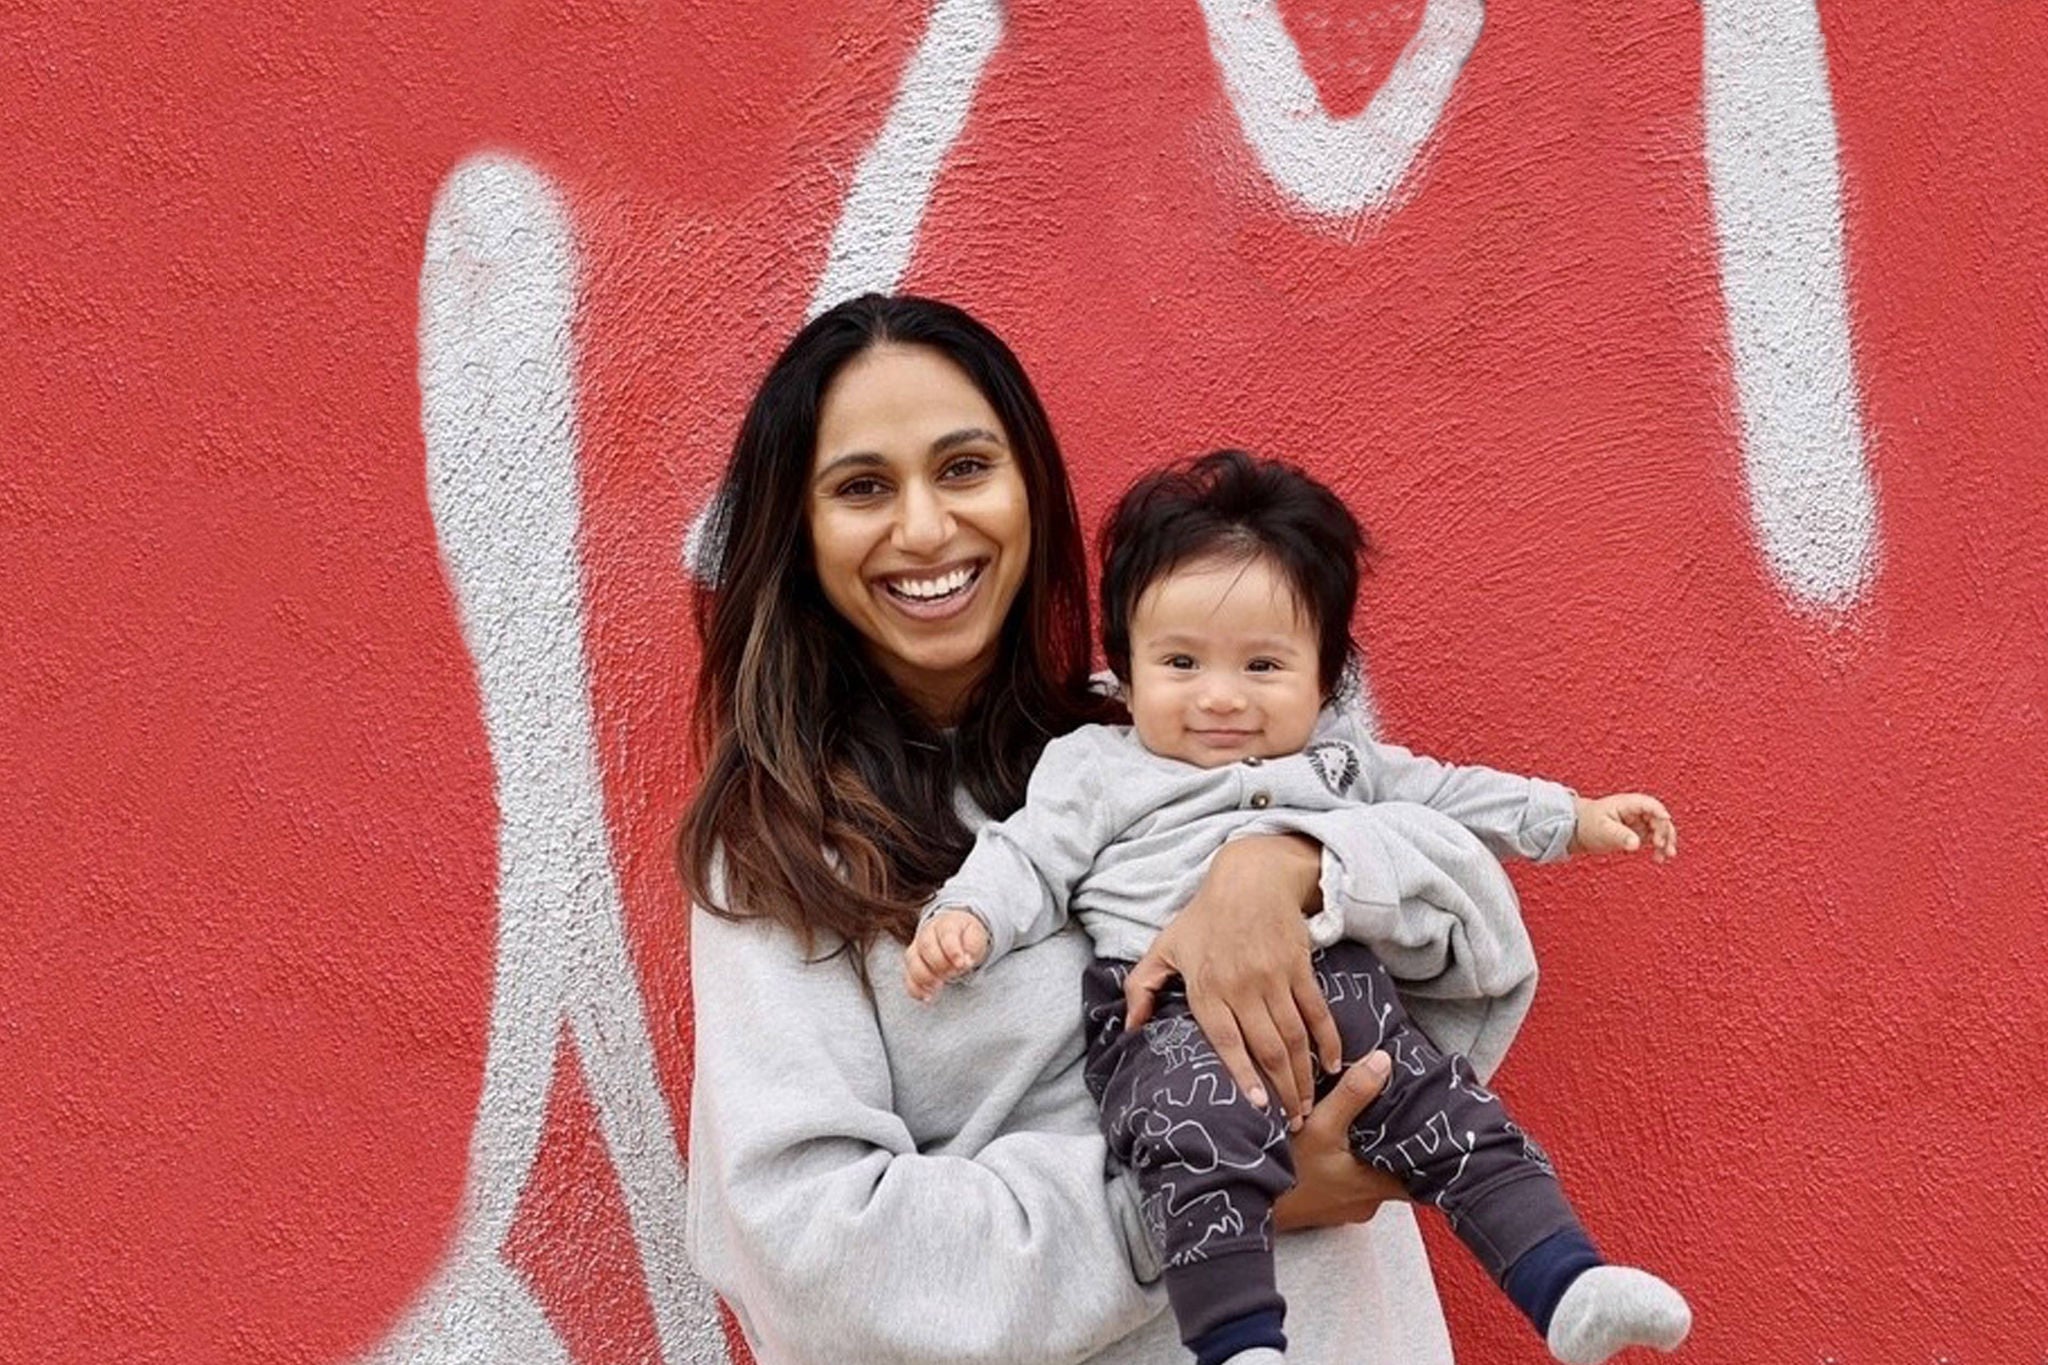 Sonia Parikh holding a child in front of a wall with graffiti 